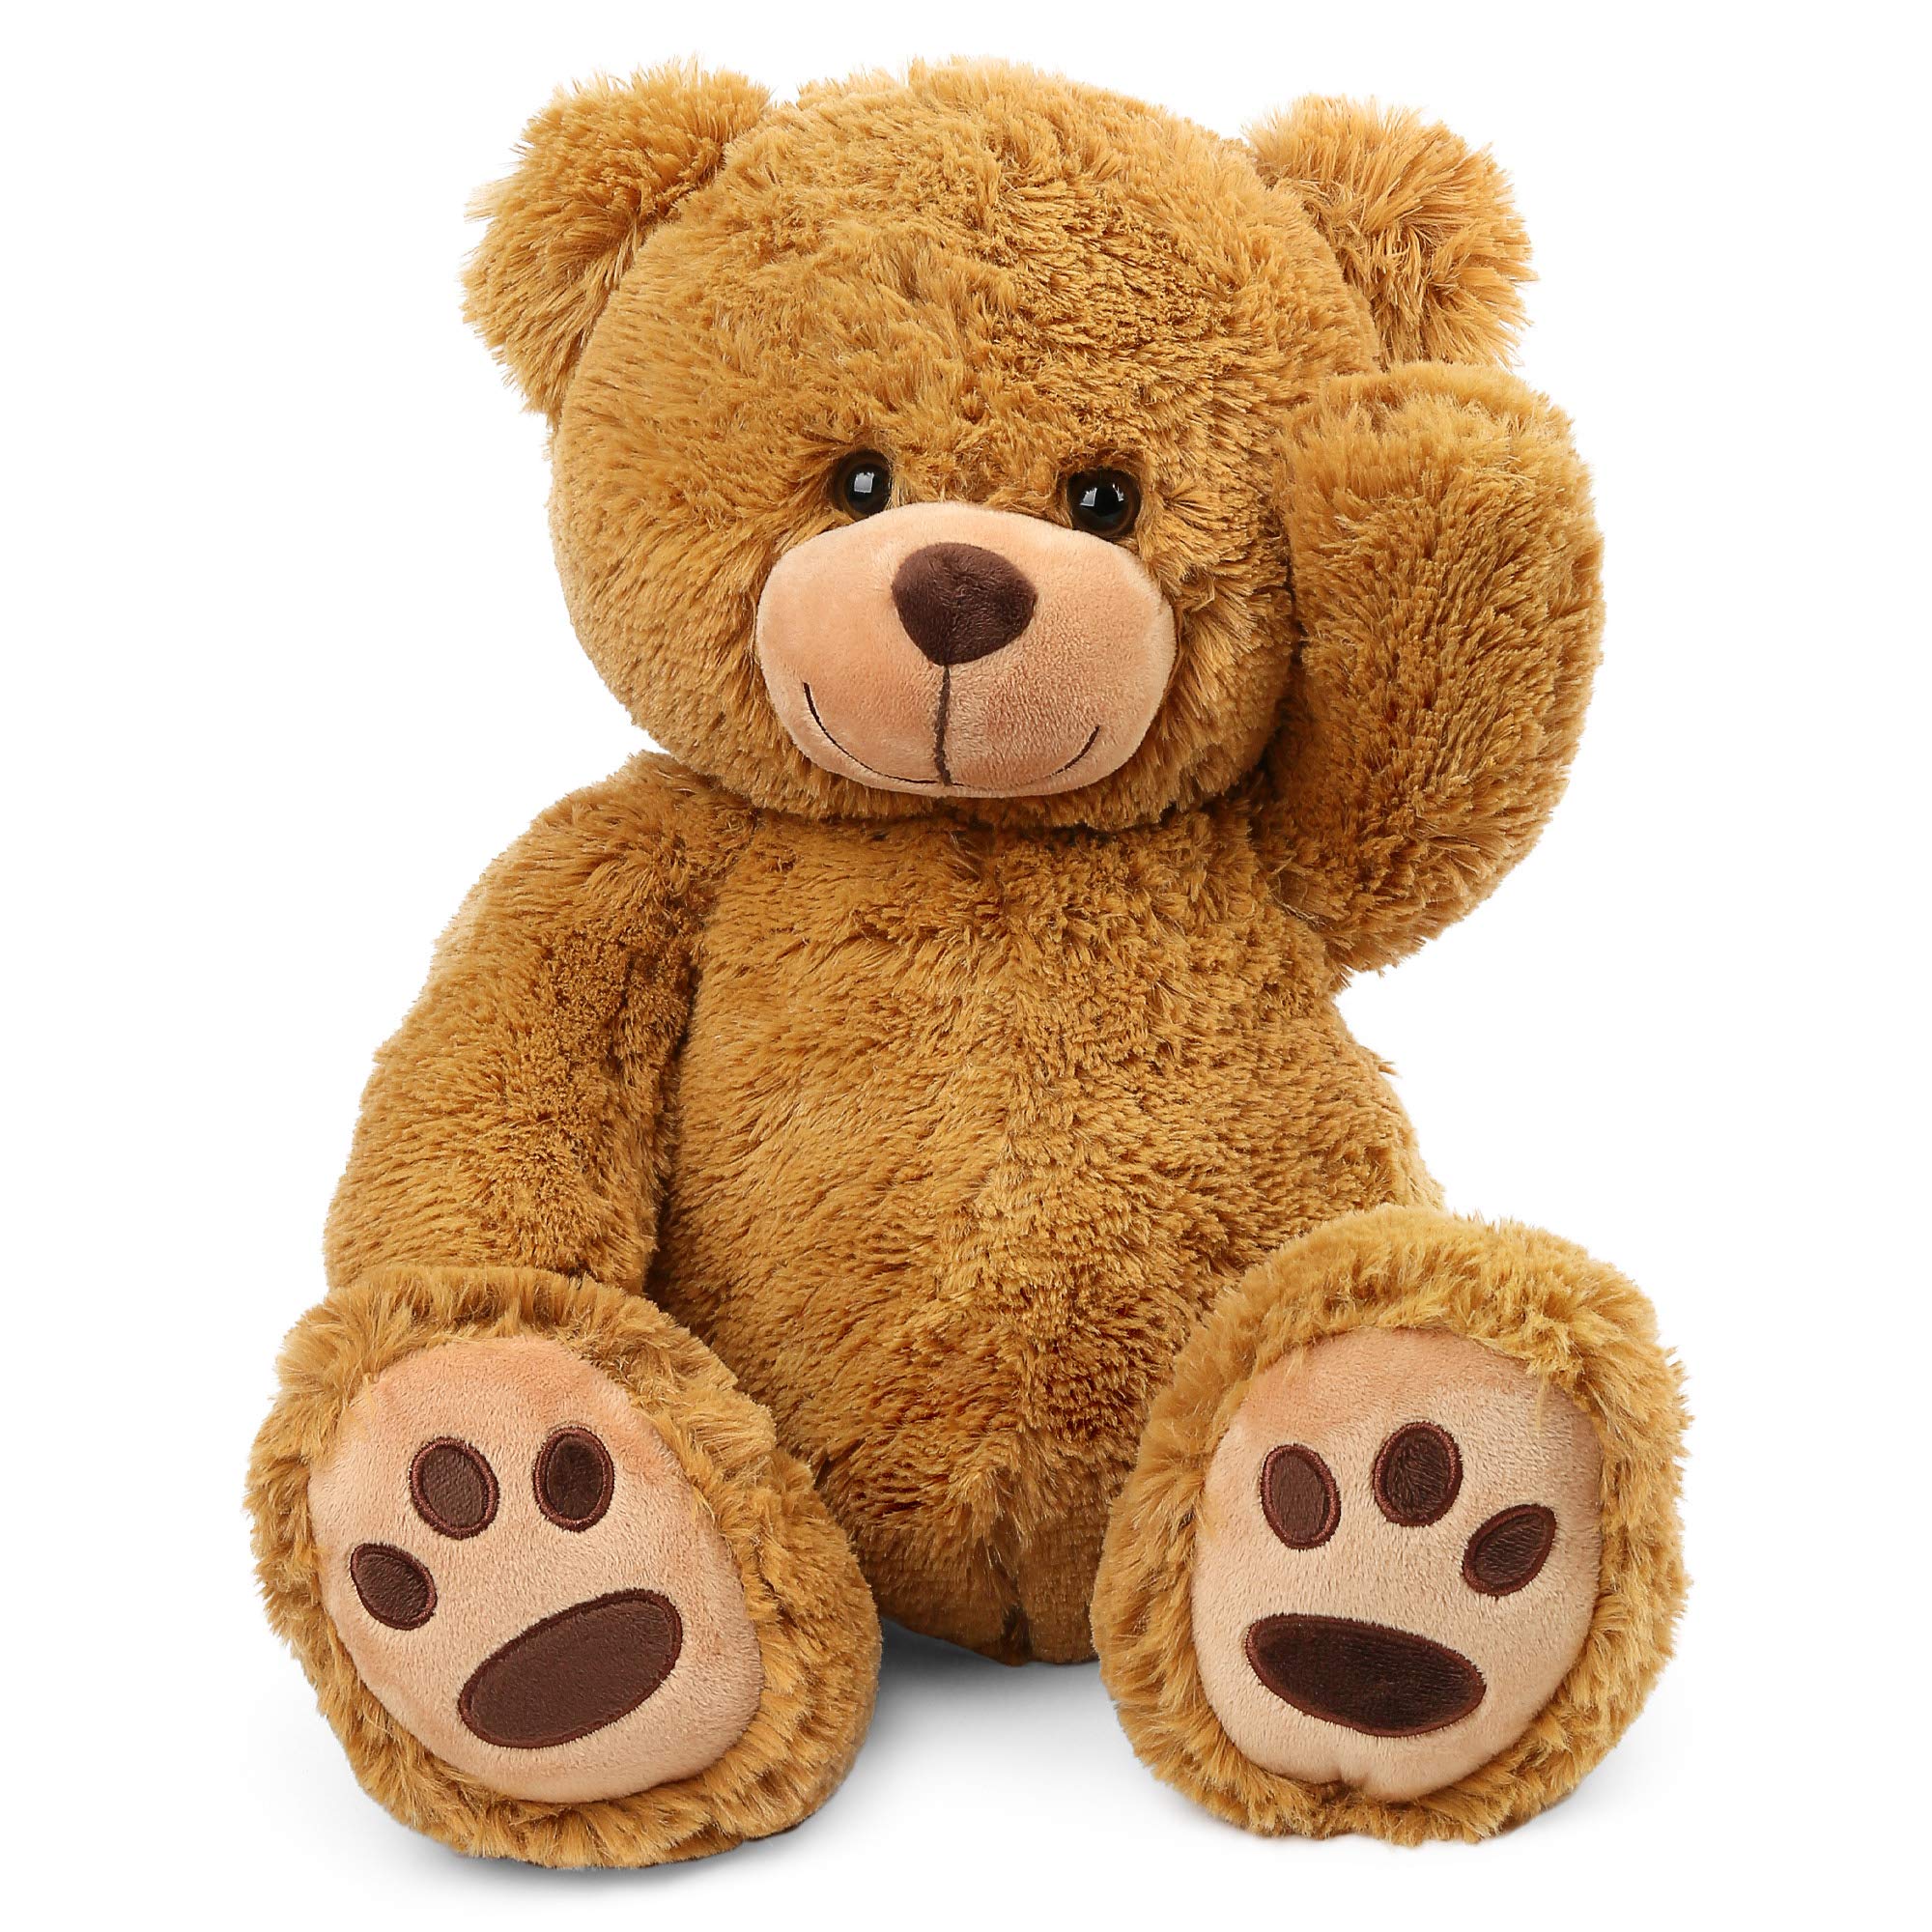 Mua LotFancy 20 inch Teddy Bear Stuffed Animals, Soft Cuddly Stuffed Plush  Bear, Cute Stuffed Animals Toy with Footprints, Gifts for Kids Baby  Toddlers on Baby Shower, Birthday, Easter, Tan Color trên